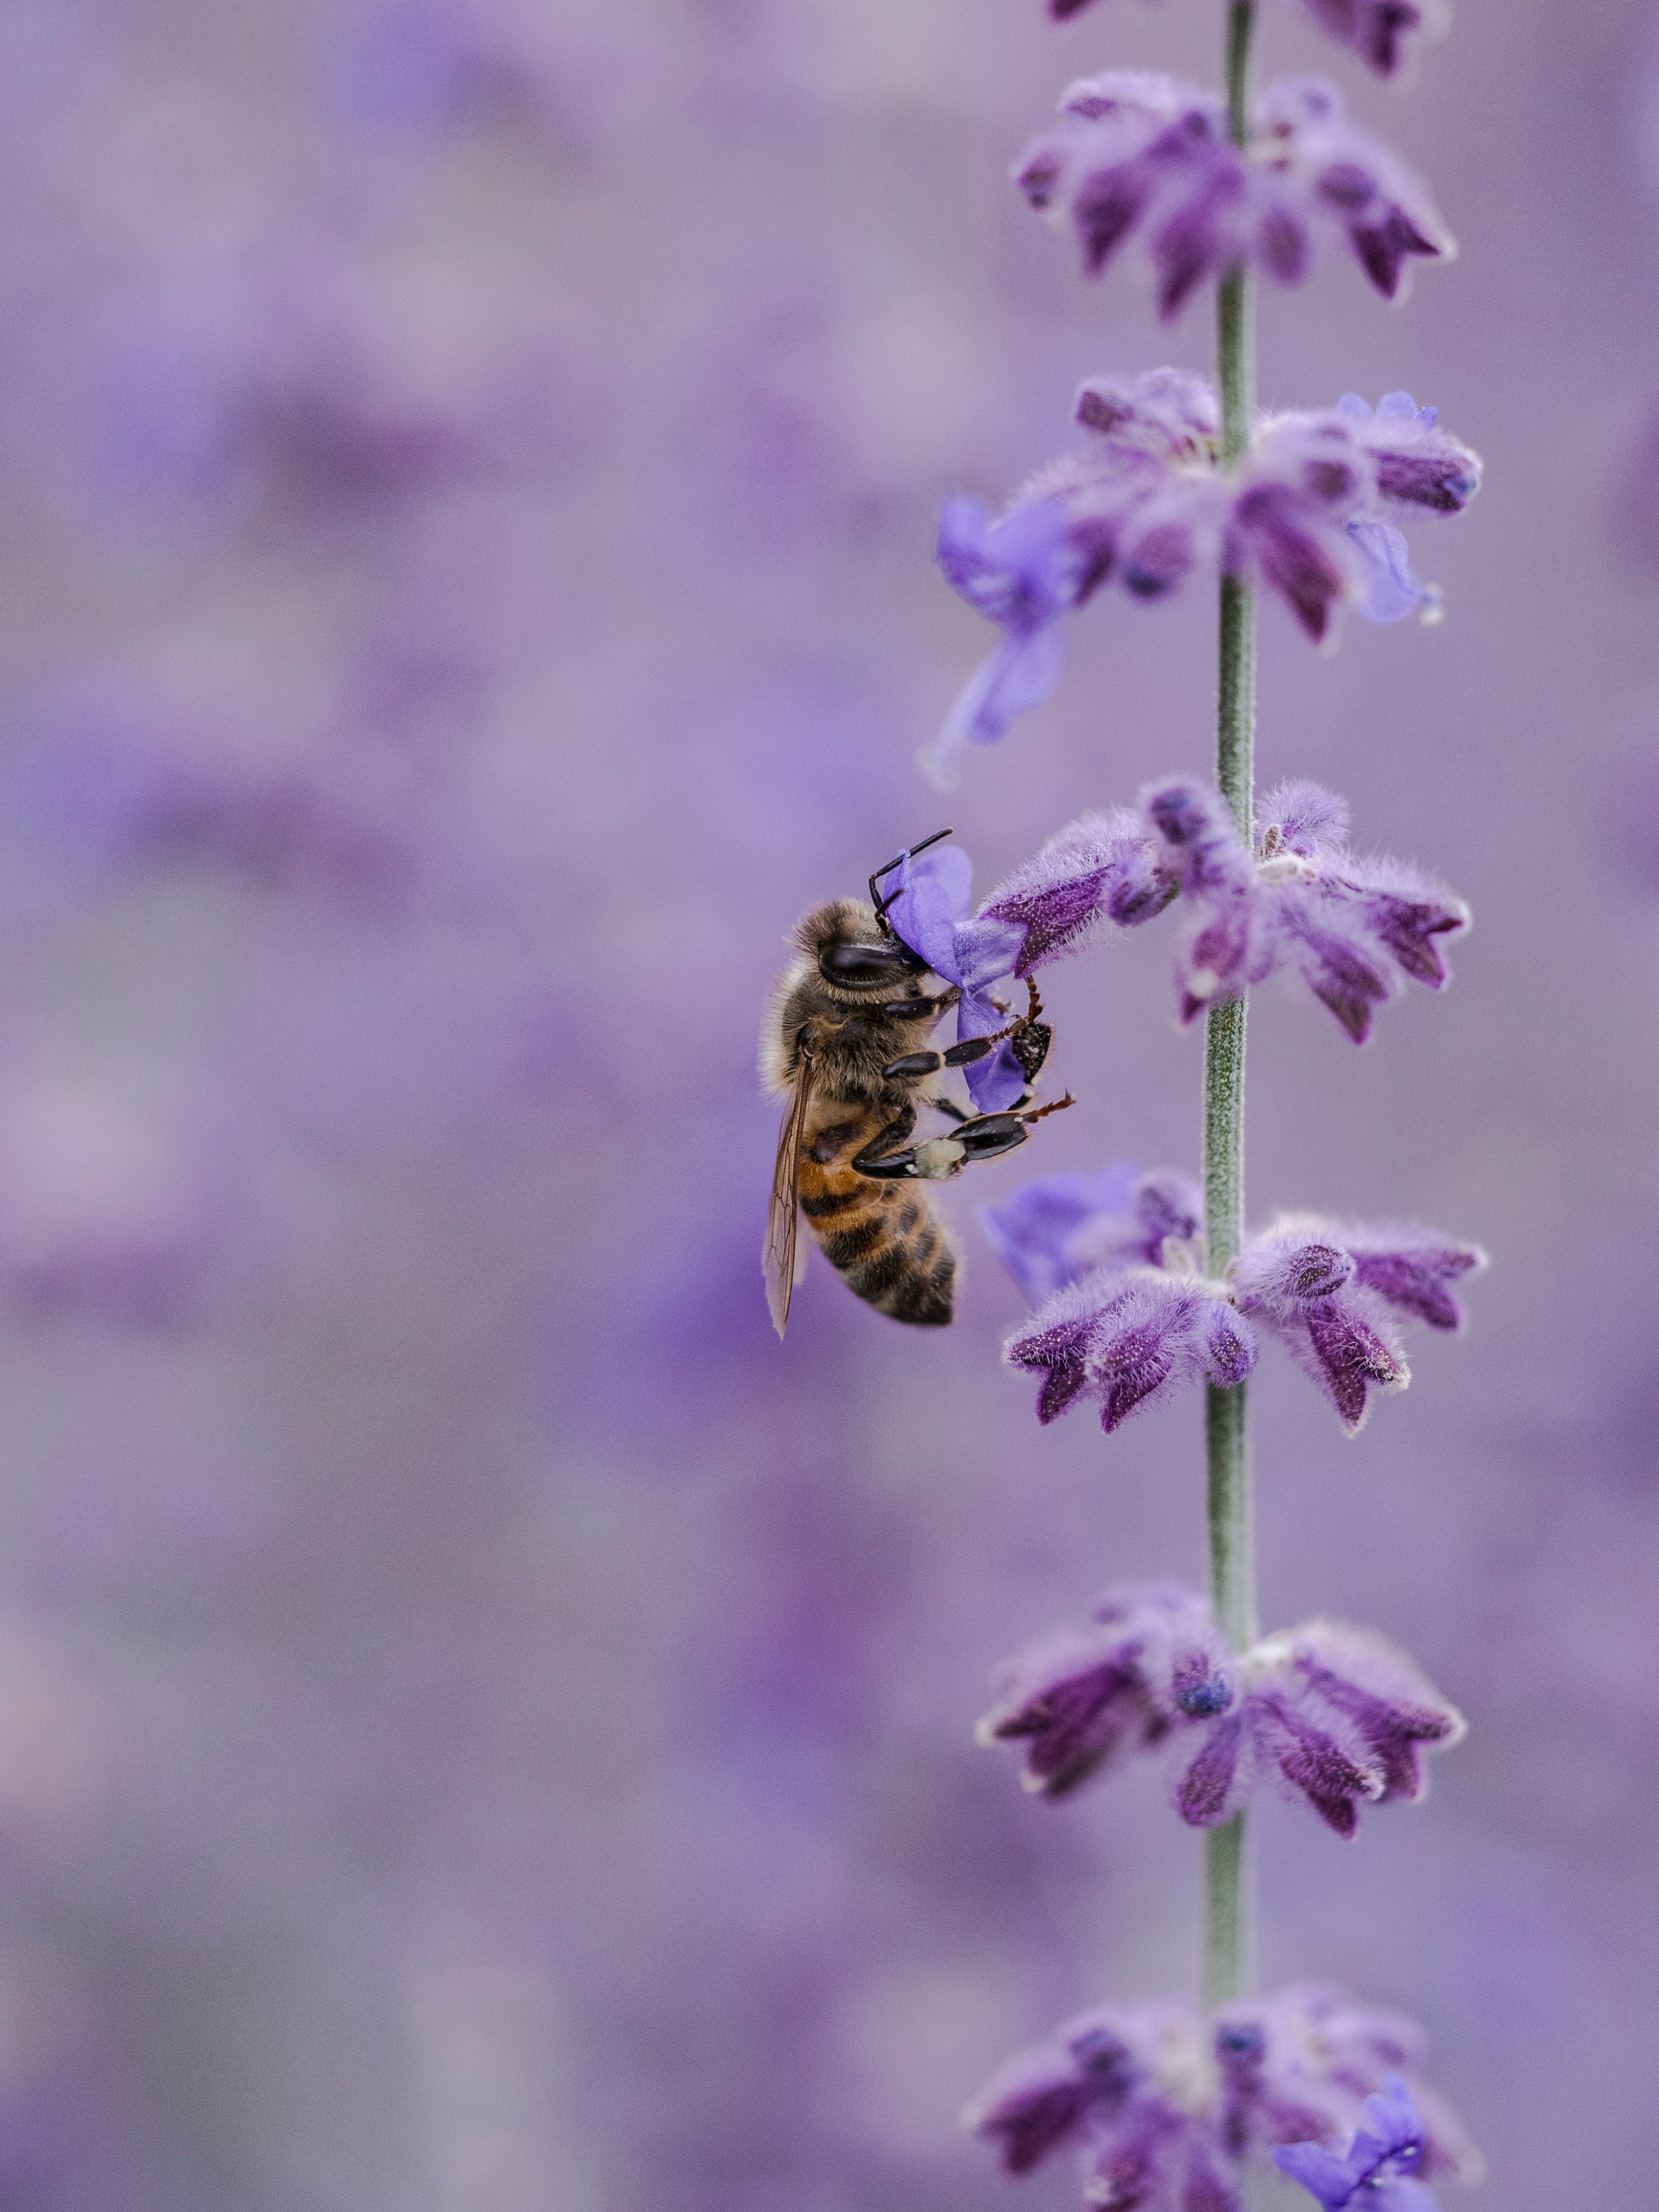 Honey Bee and Lavender Flower photo by Aaron Burden